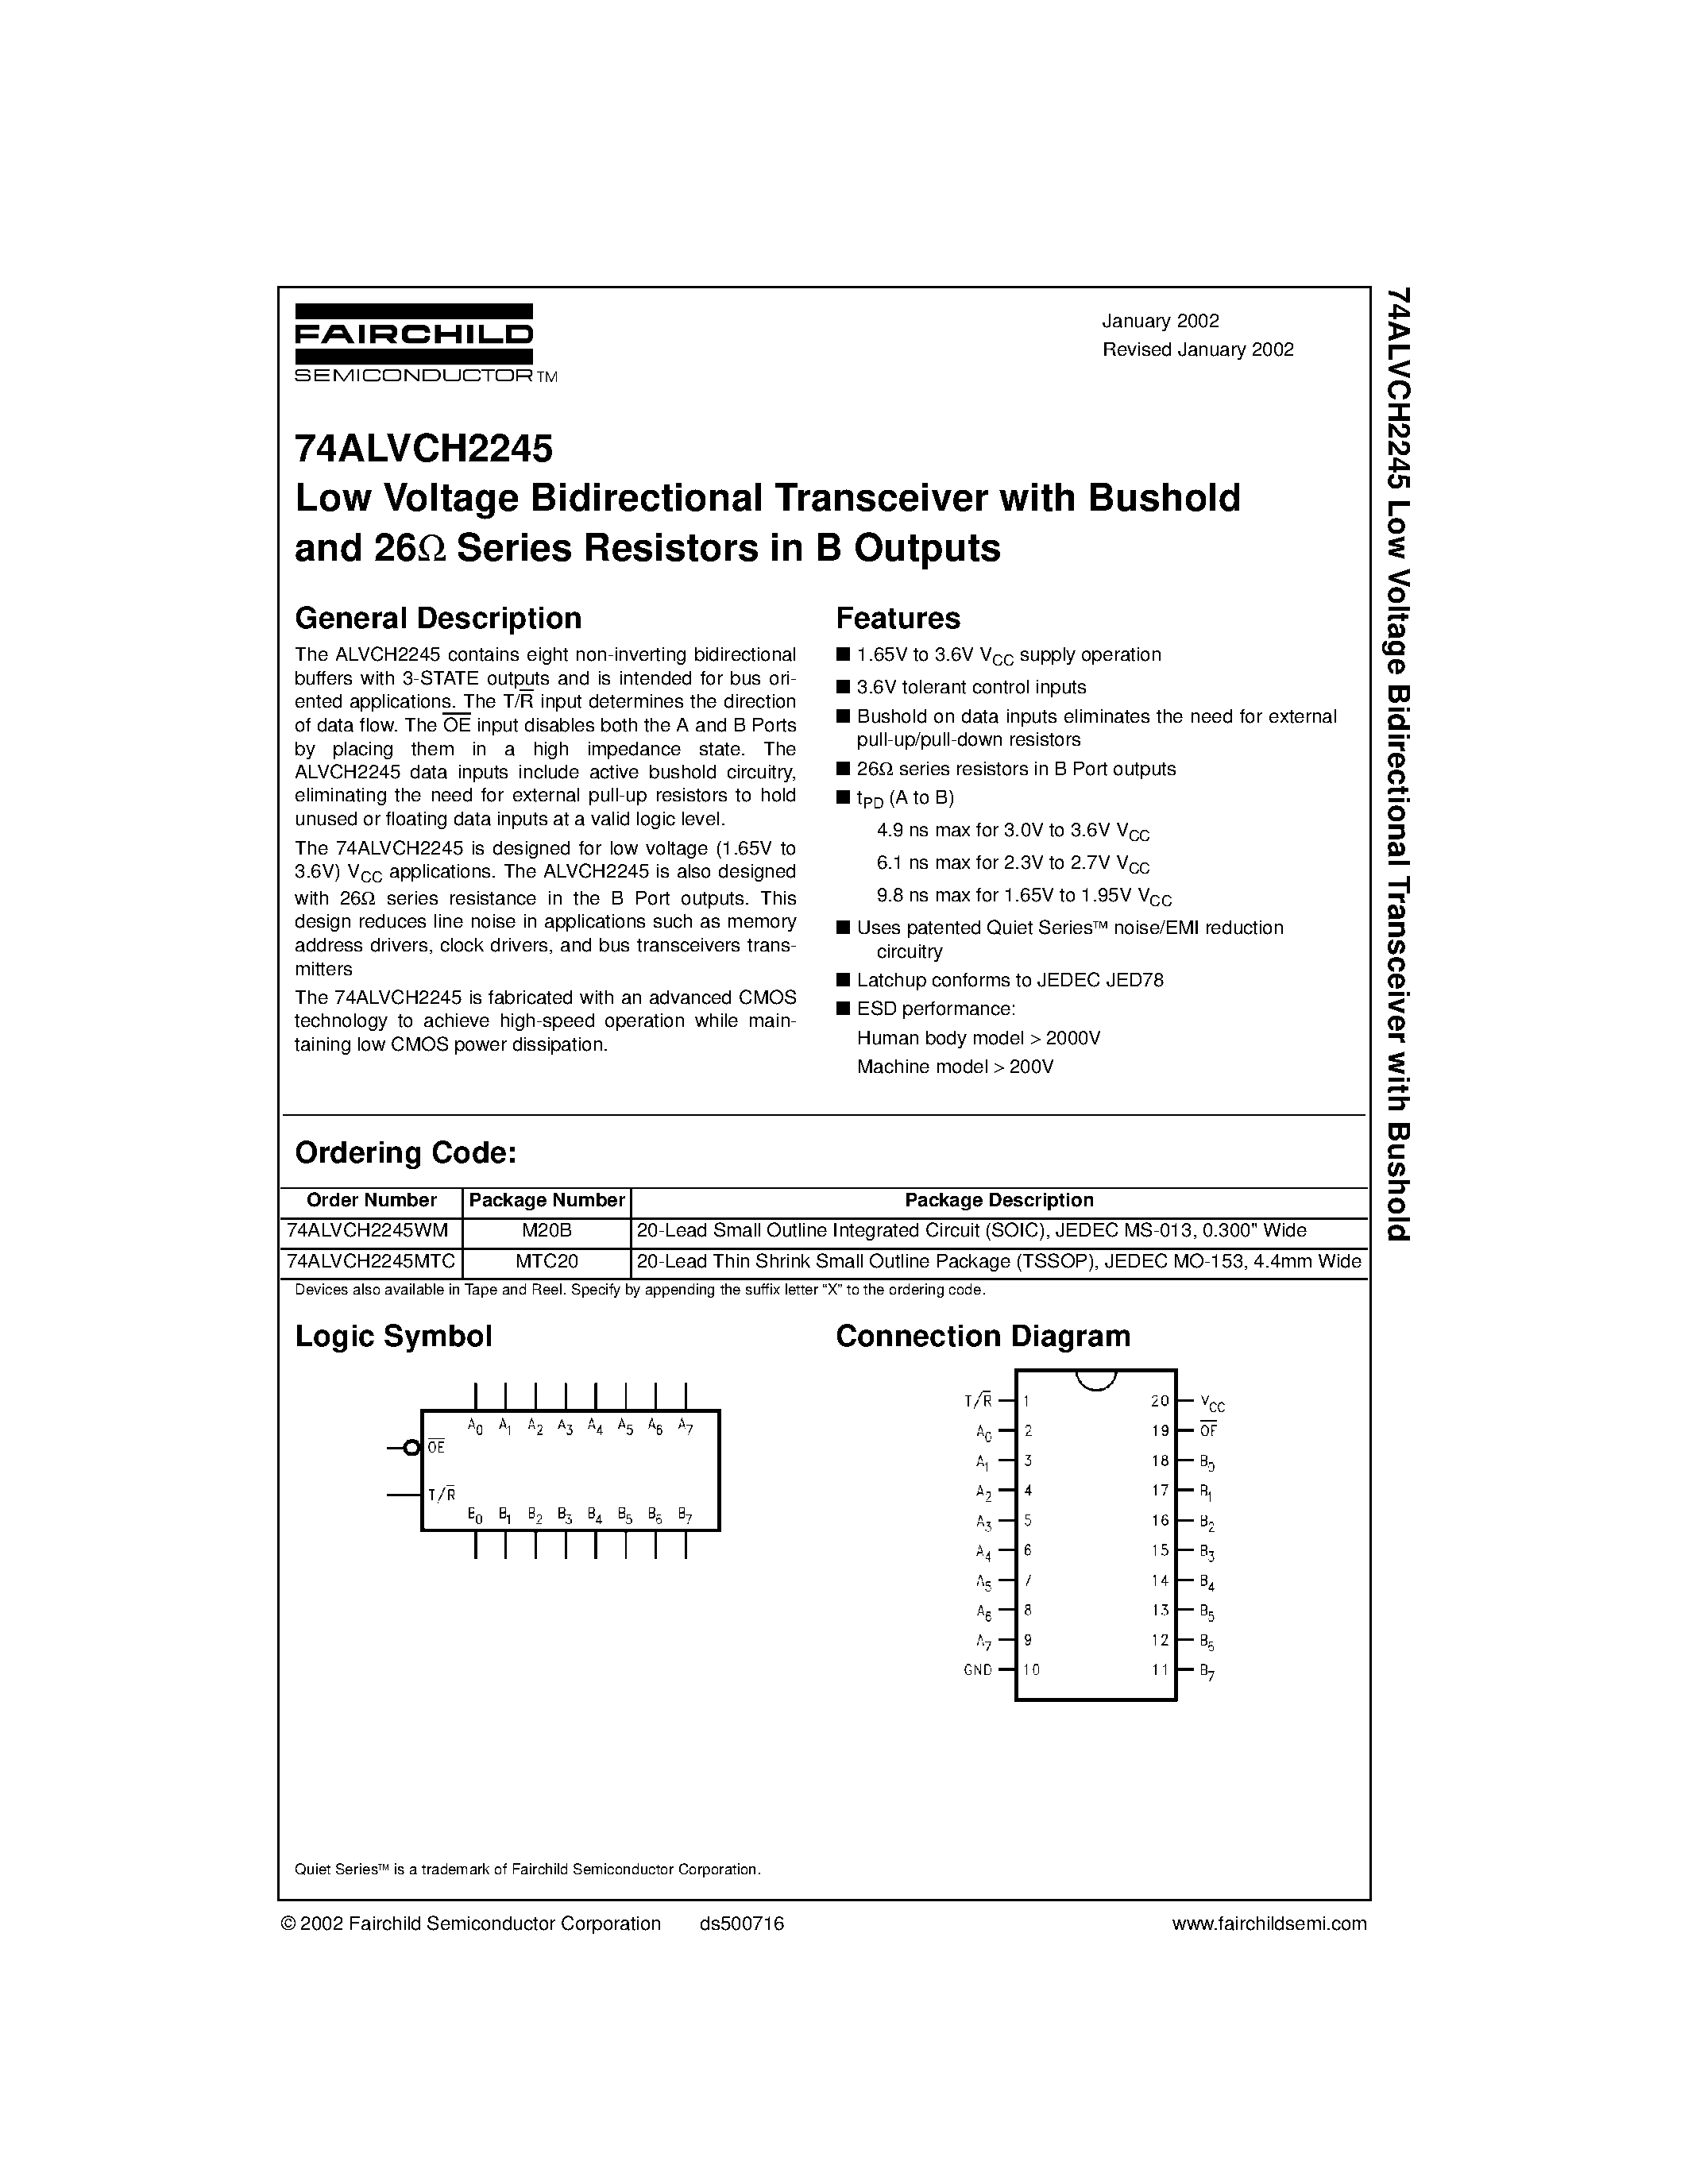 Datasheet 74ALVCH2245 - Low Voltage Bidirectional Transceiver with Bushold and 26 Series Resistors in B Outputs page 1